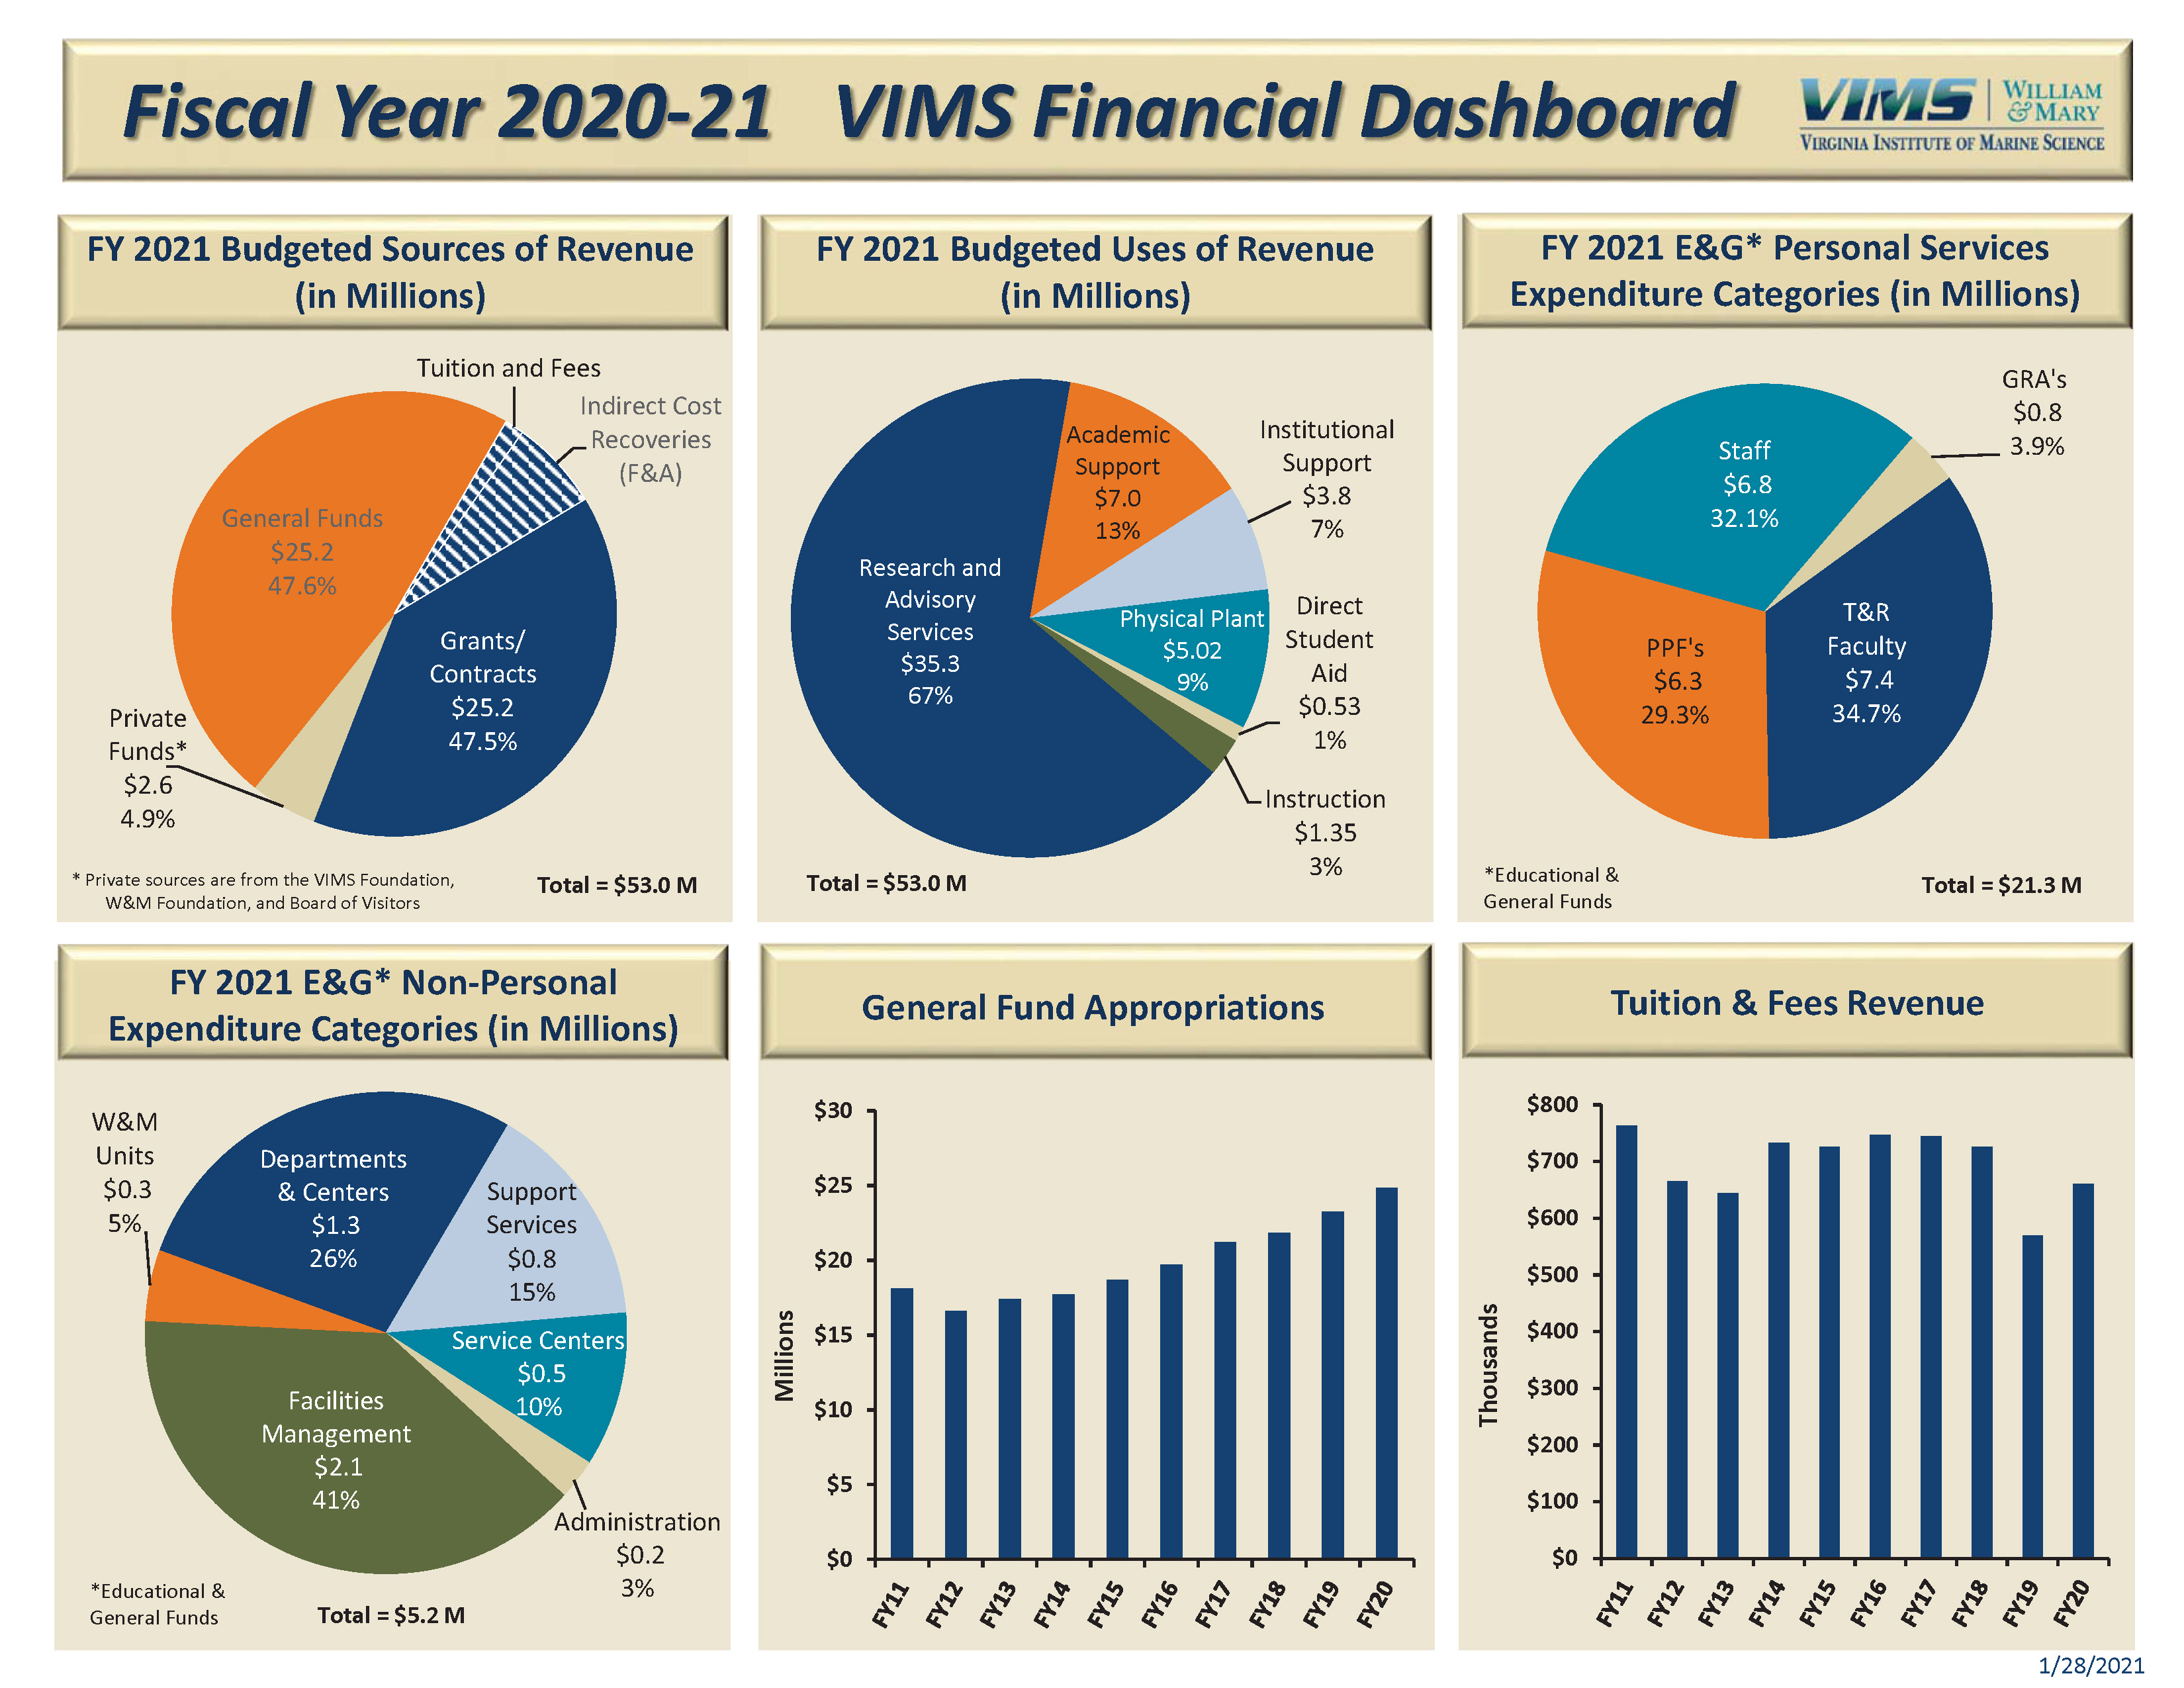 vims_financial_dashboard_fy21_final_page_1-1.jpg